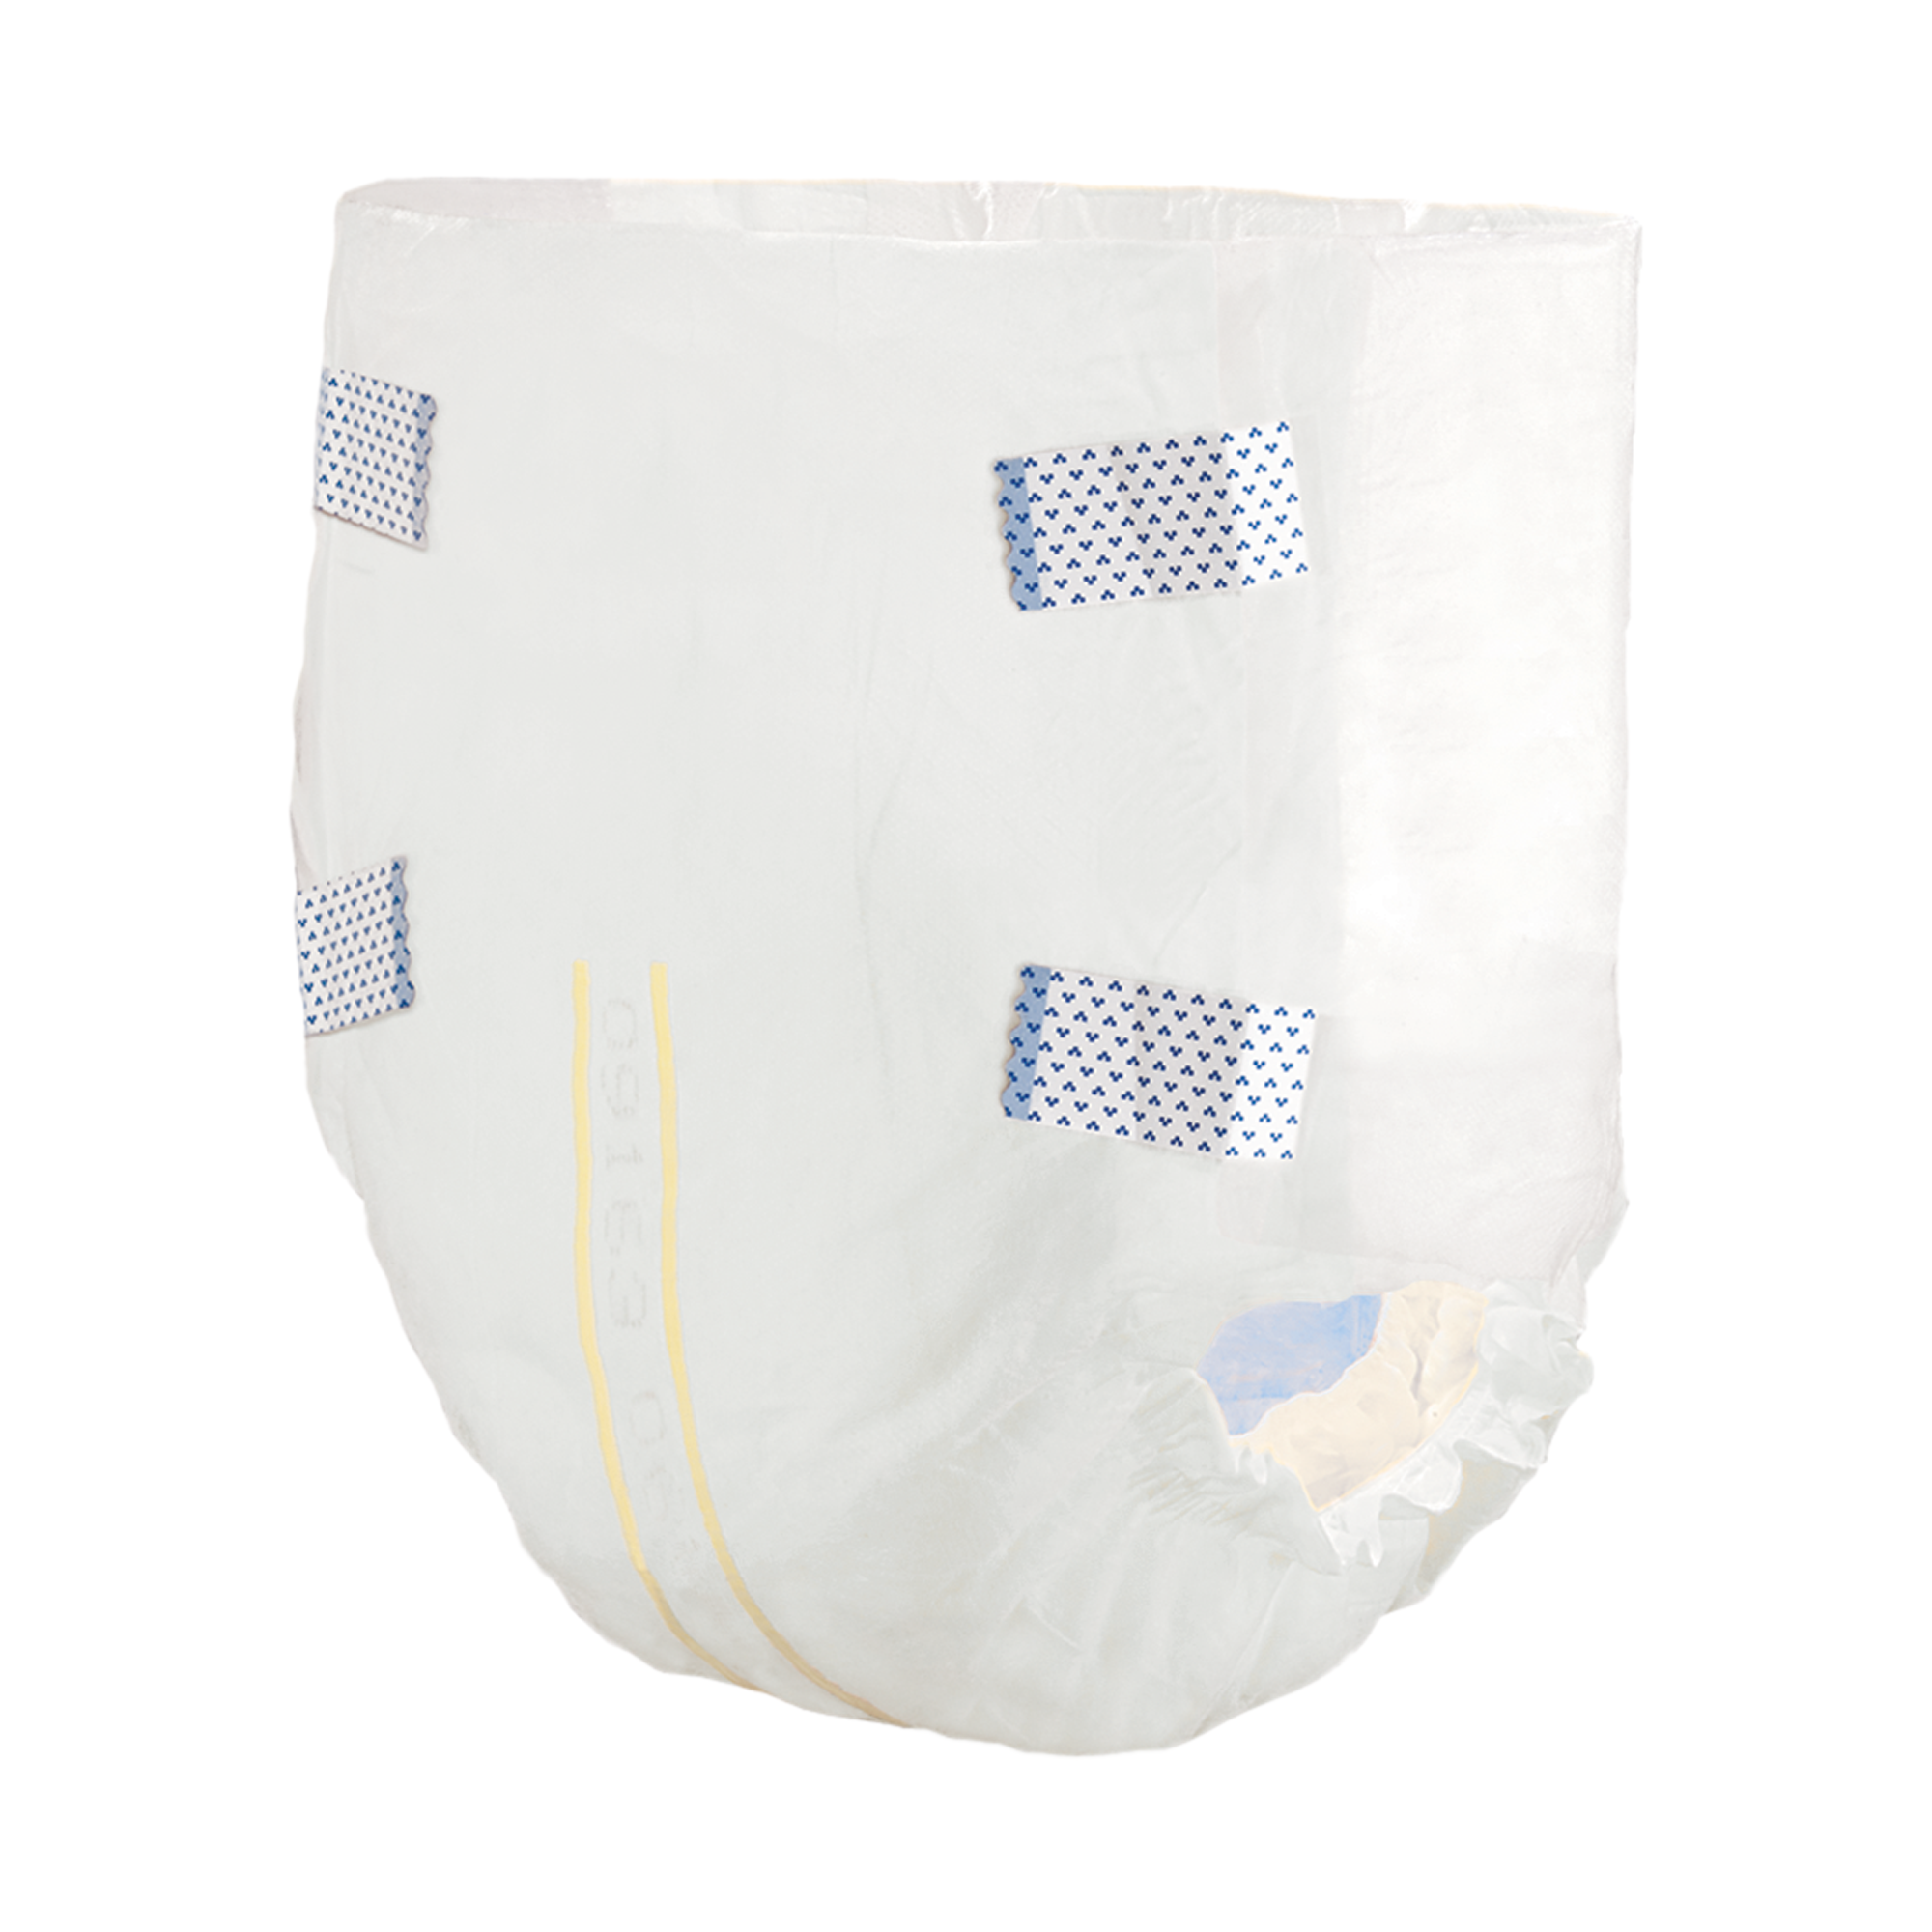 Tranquility Essential Breathable Brief - Adult Diaper with Tabs